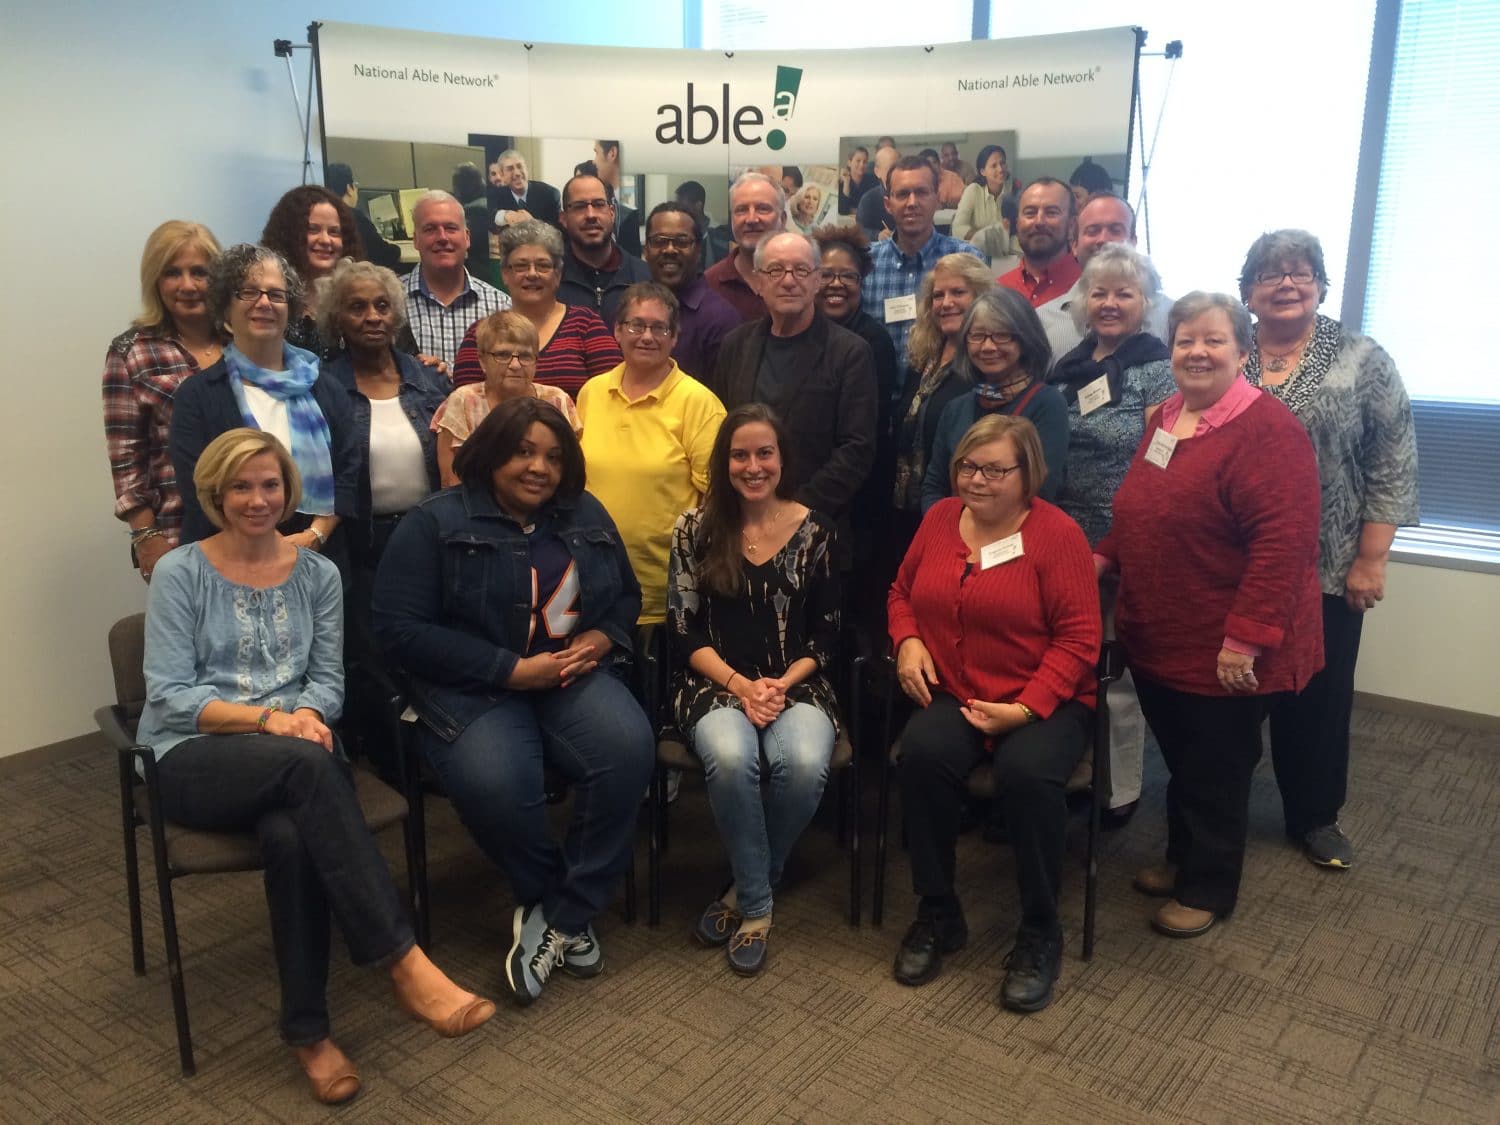 National Able Network Senior Services Team